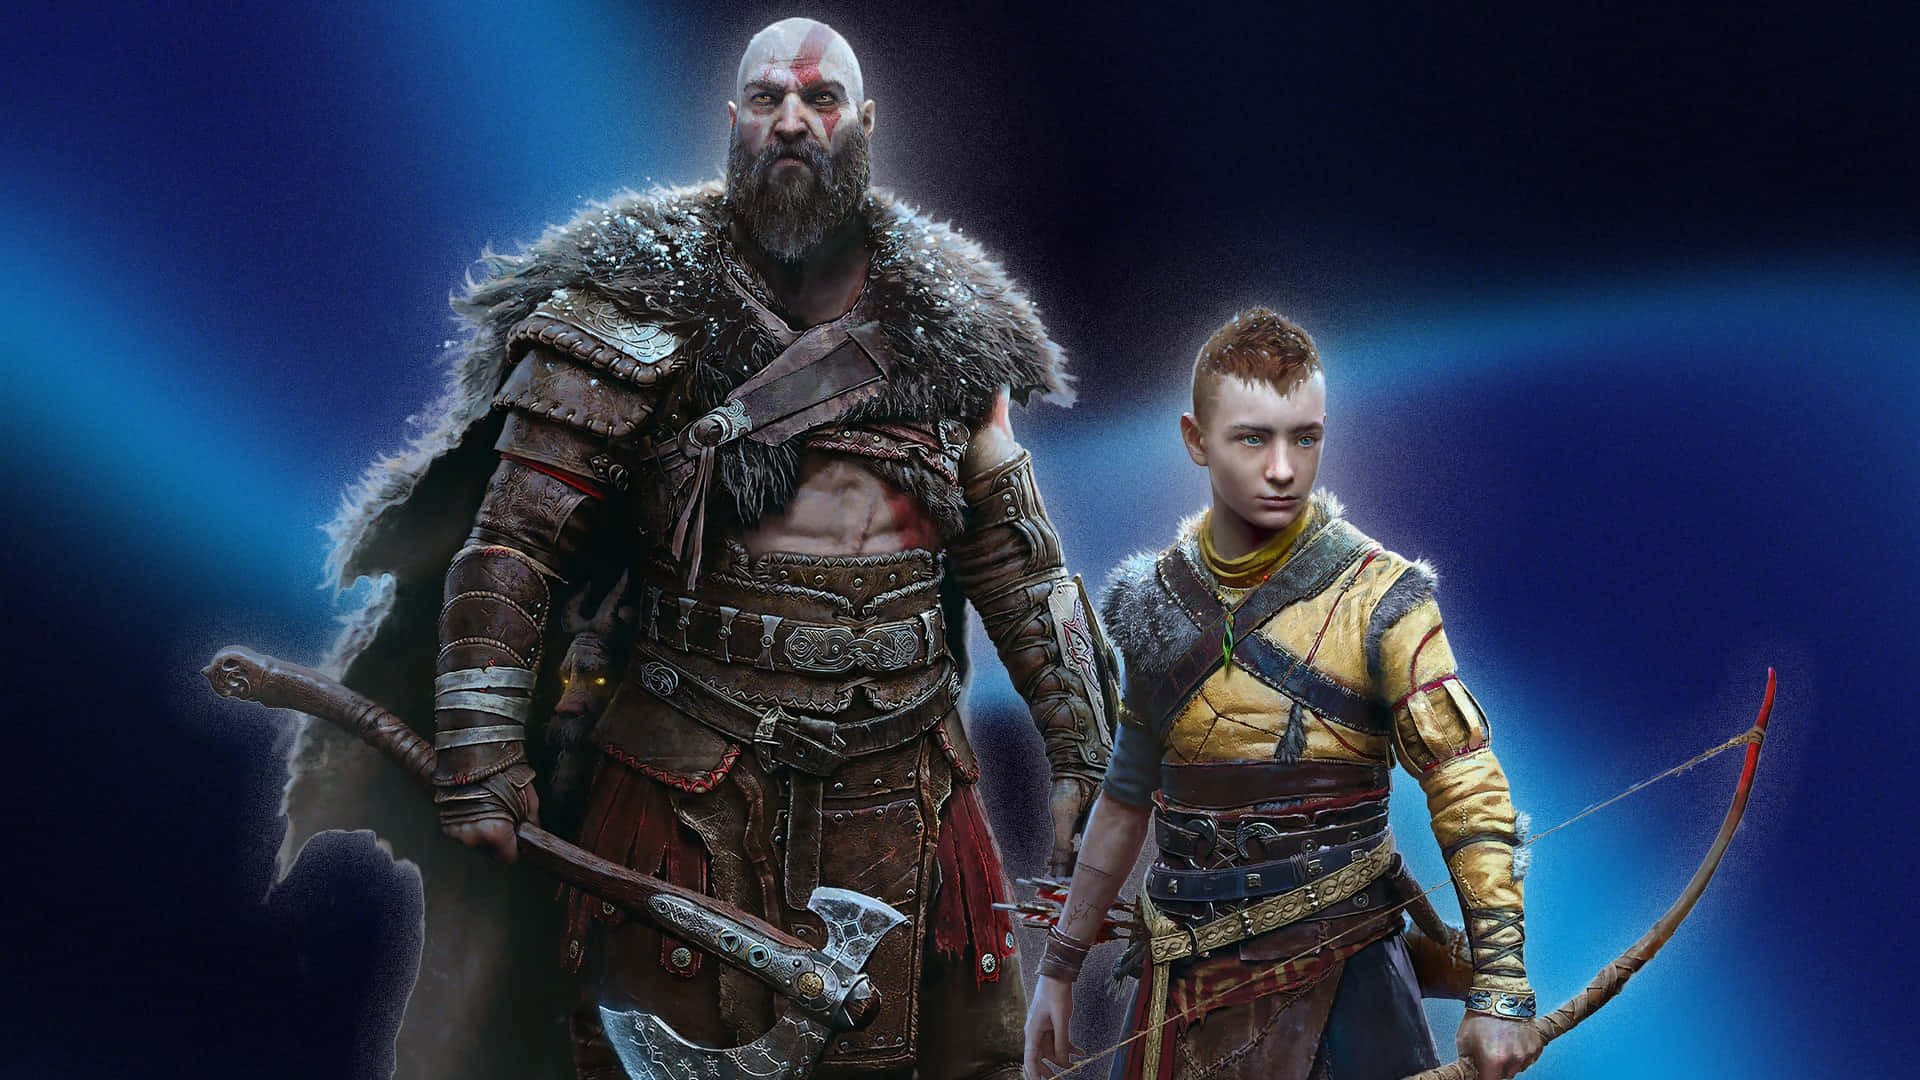 Kratos and Atreus, Achilles' Heel, on the Path to Victory in God of War 5 Wallpaper